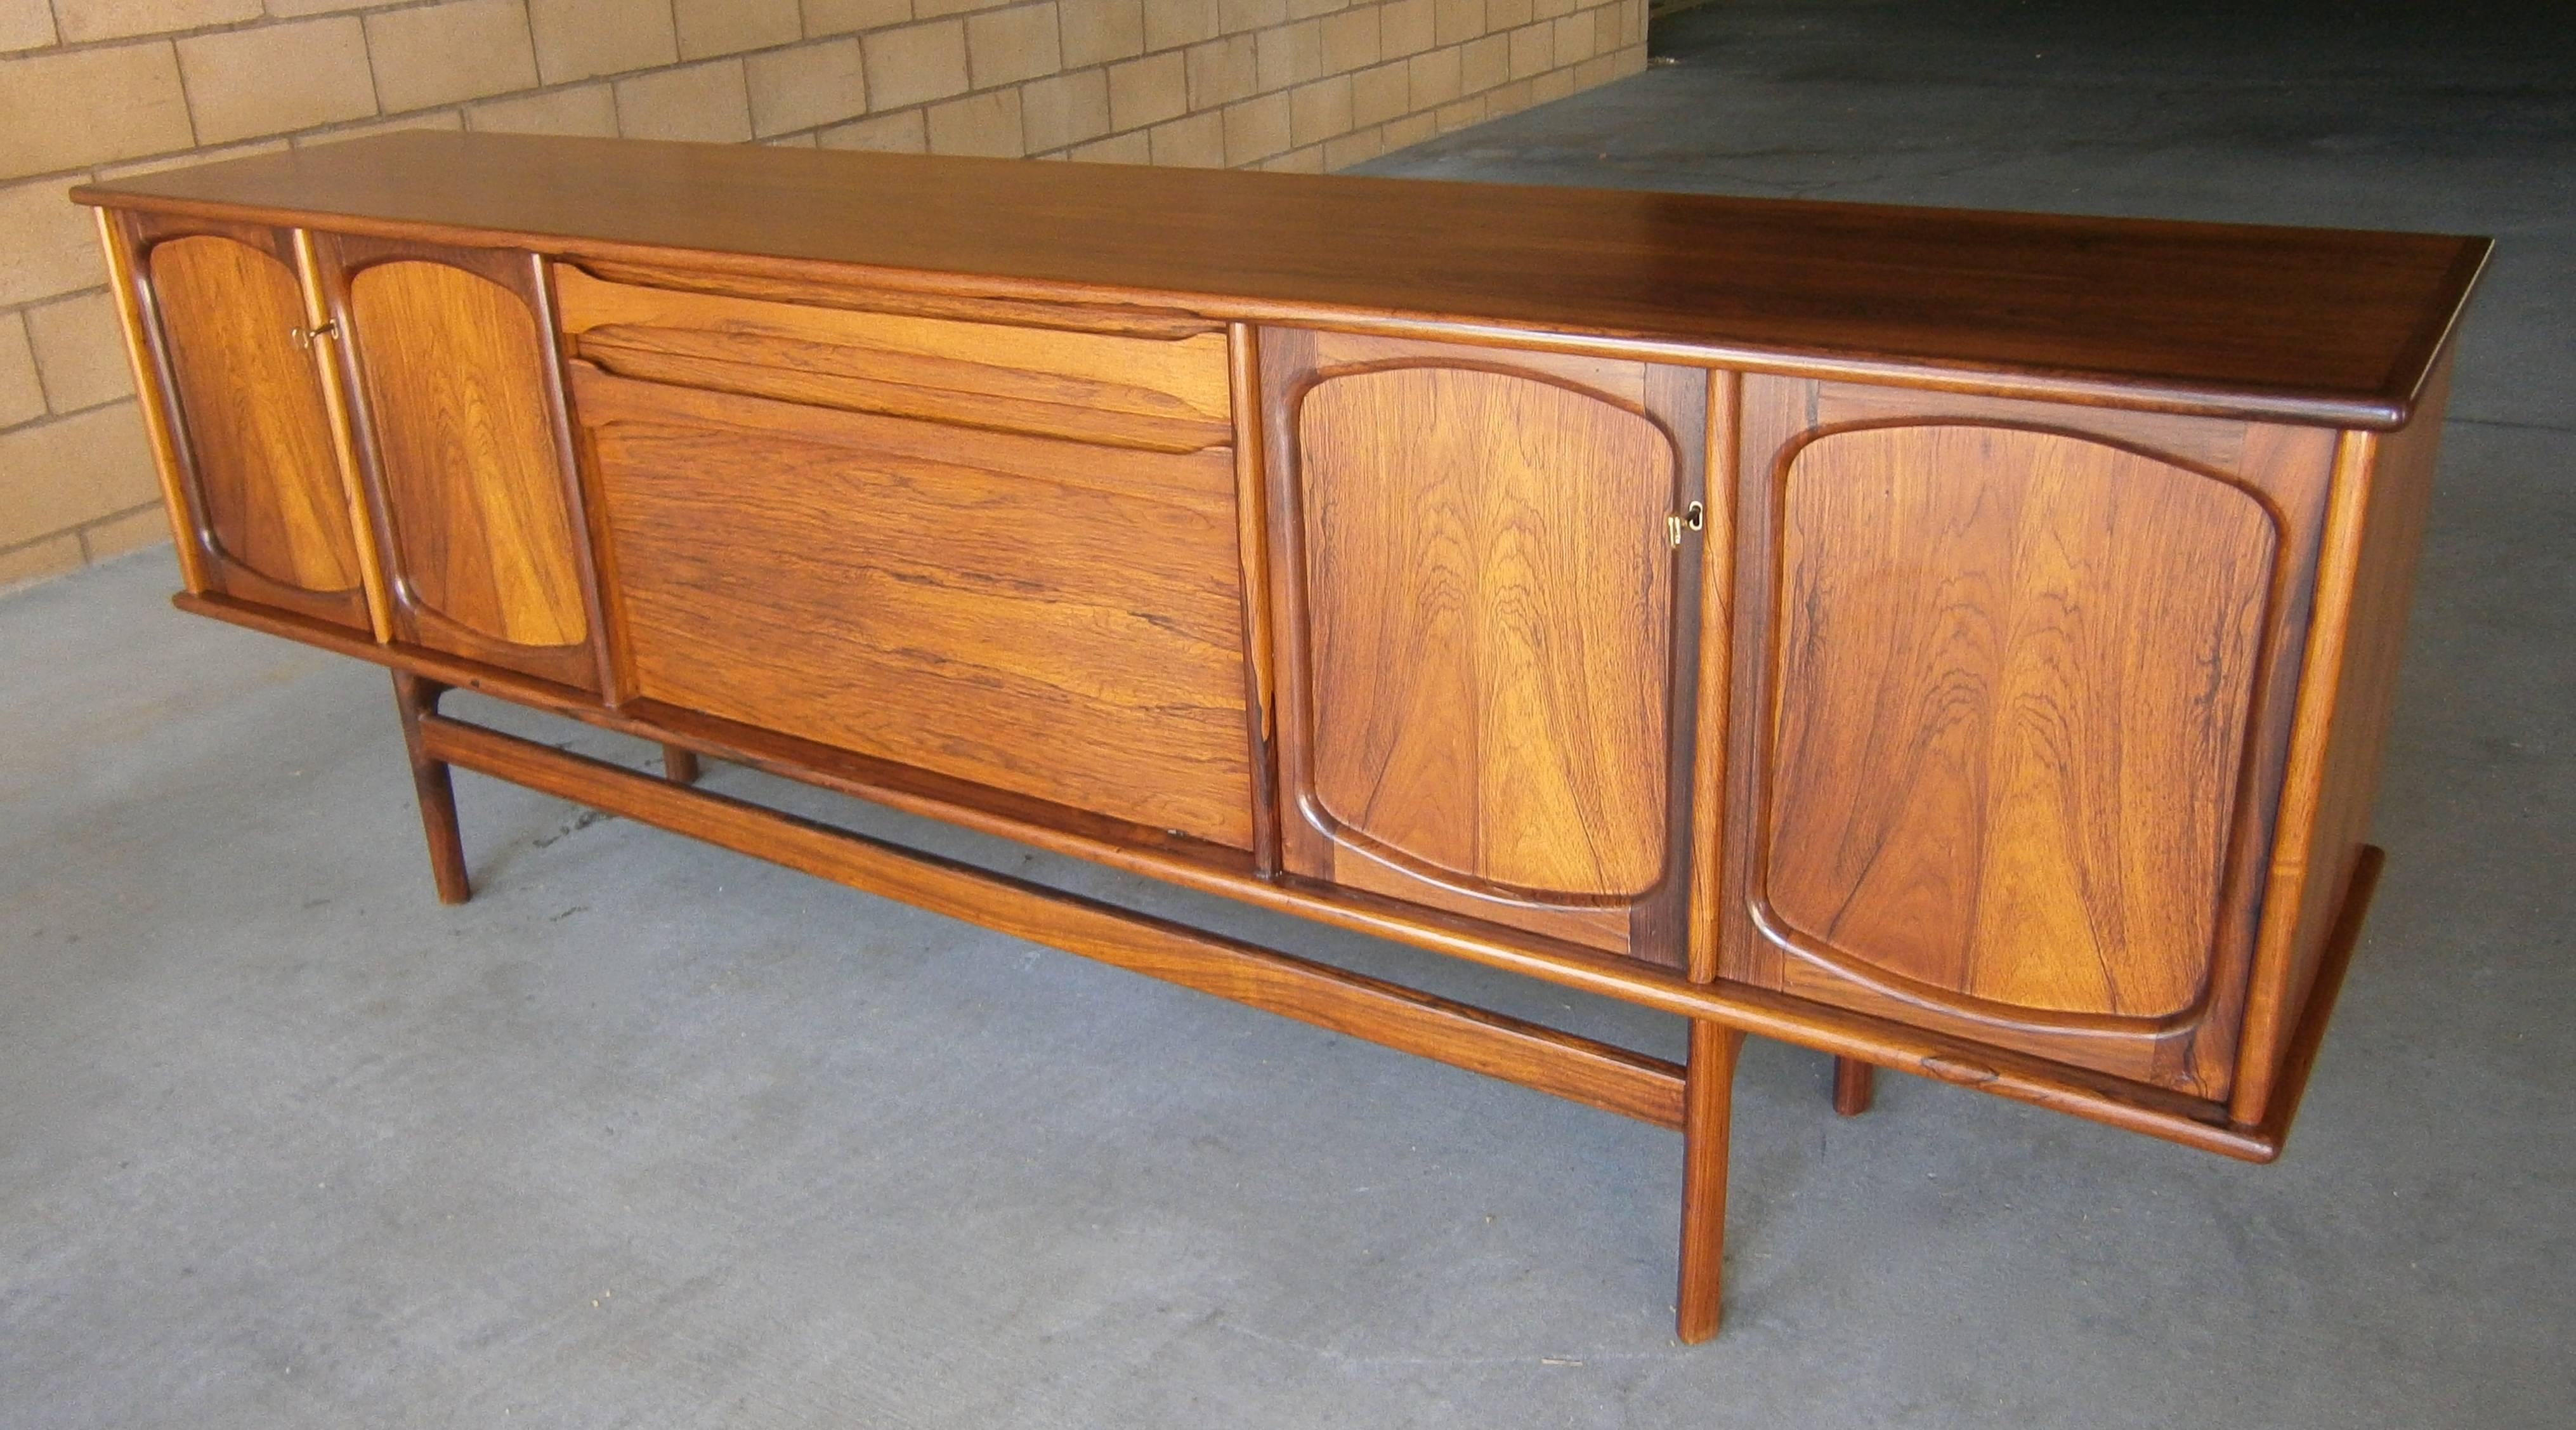 A gorgeous and outstanding 1960s Norwegian figured rosewood sideboard, attributed to furniture designer Gerhard Berg. Pairs of doors flank a central fold-down bar and drawer section. The cabinet retains it original rosewood veneered interior shelves